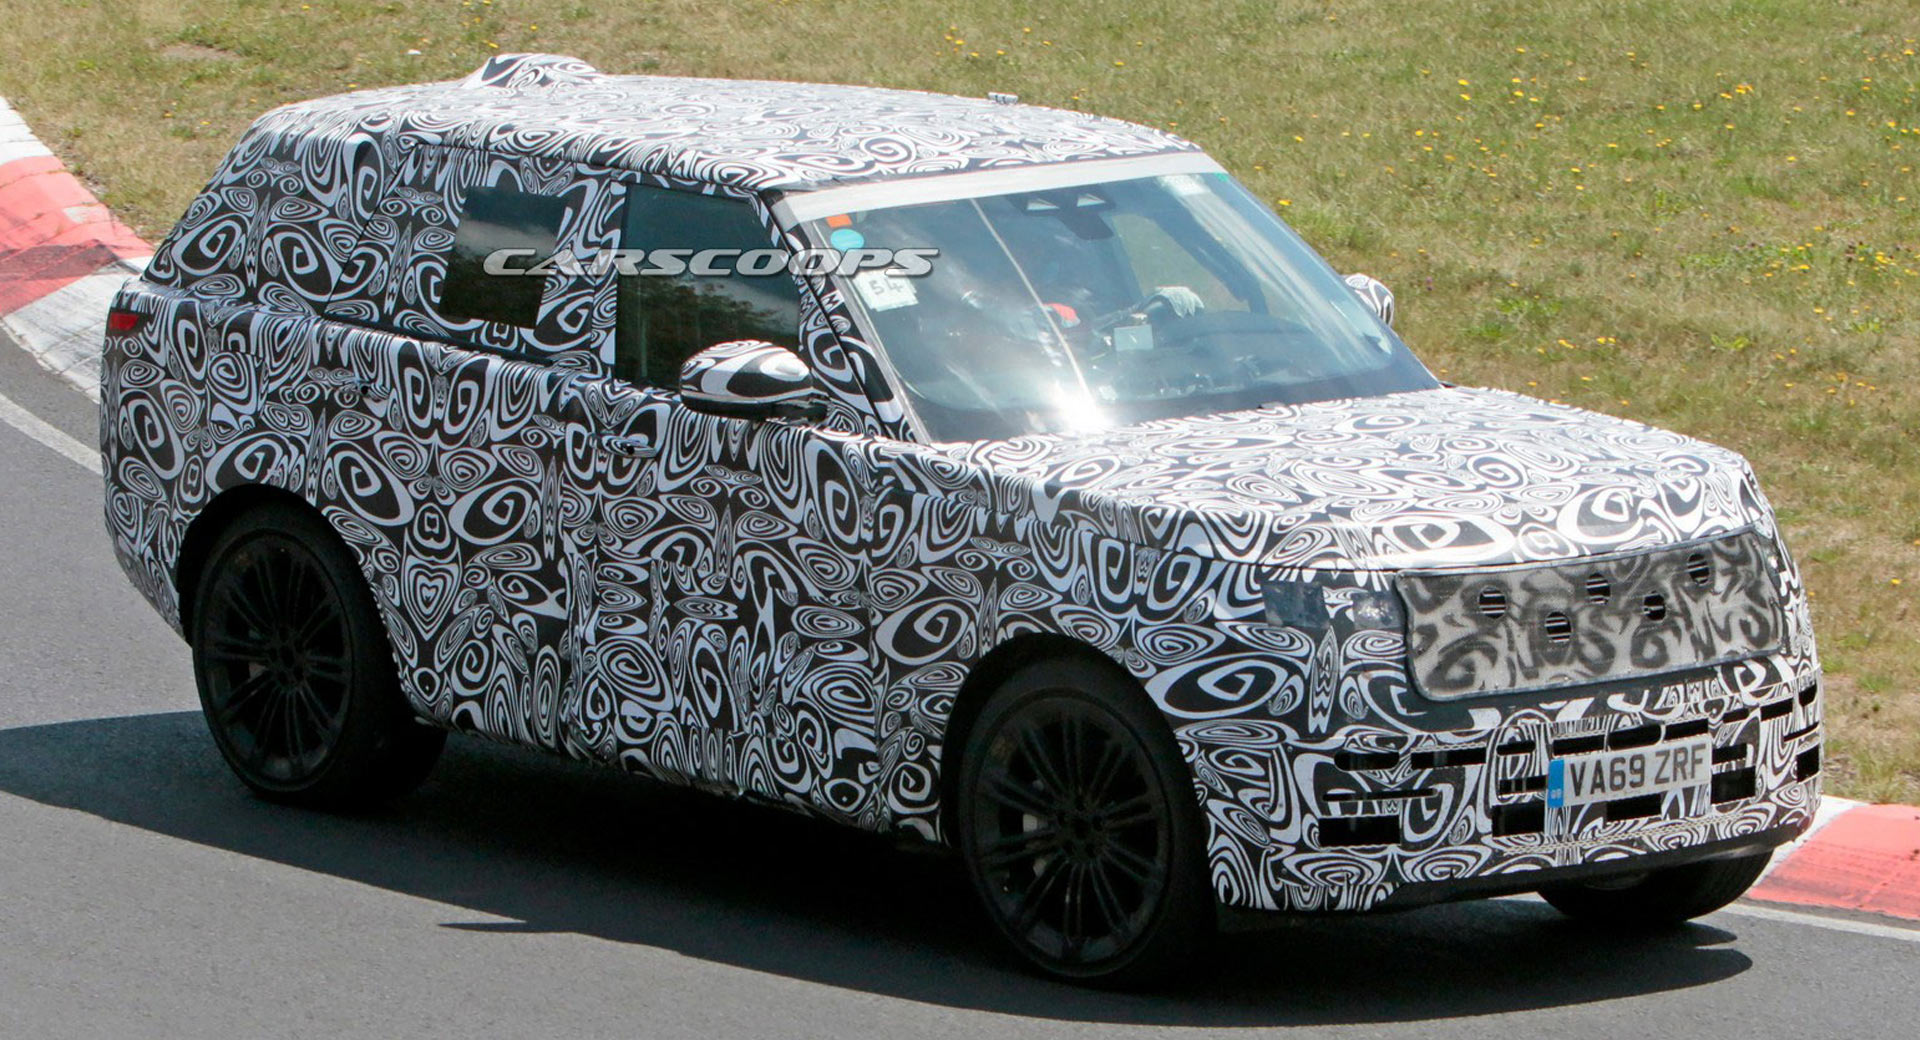  2022  Range  Rover  Trades Off Roading For The Nurburgring 